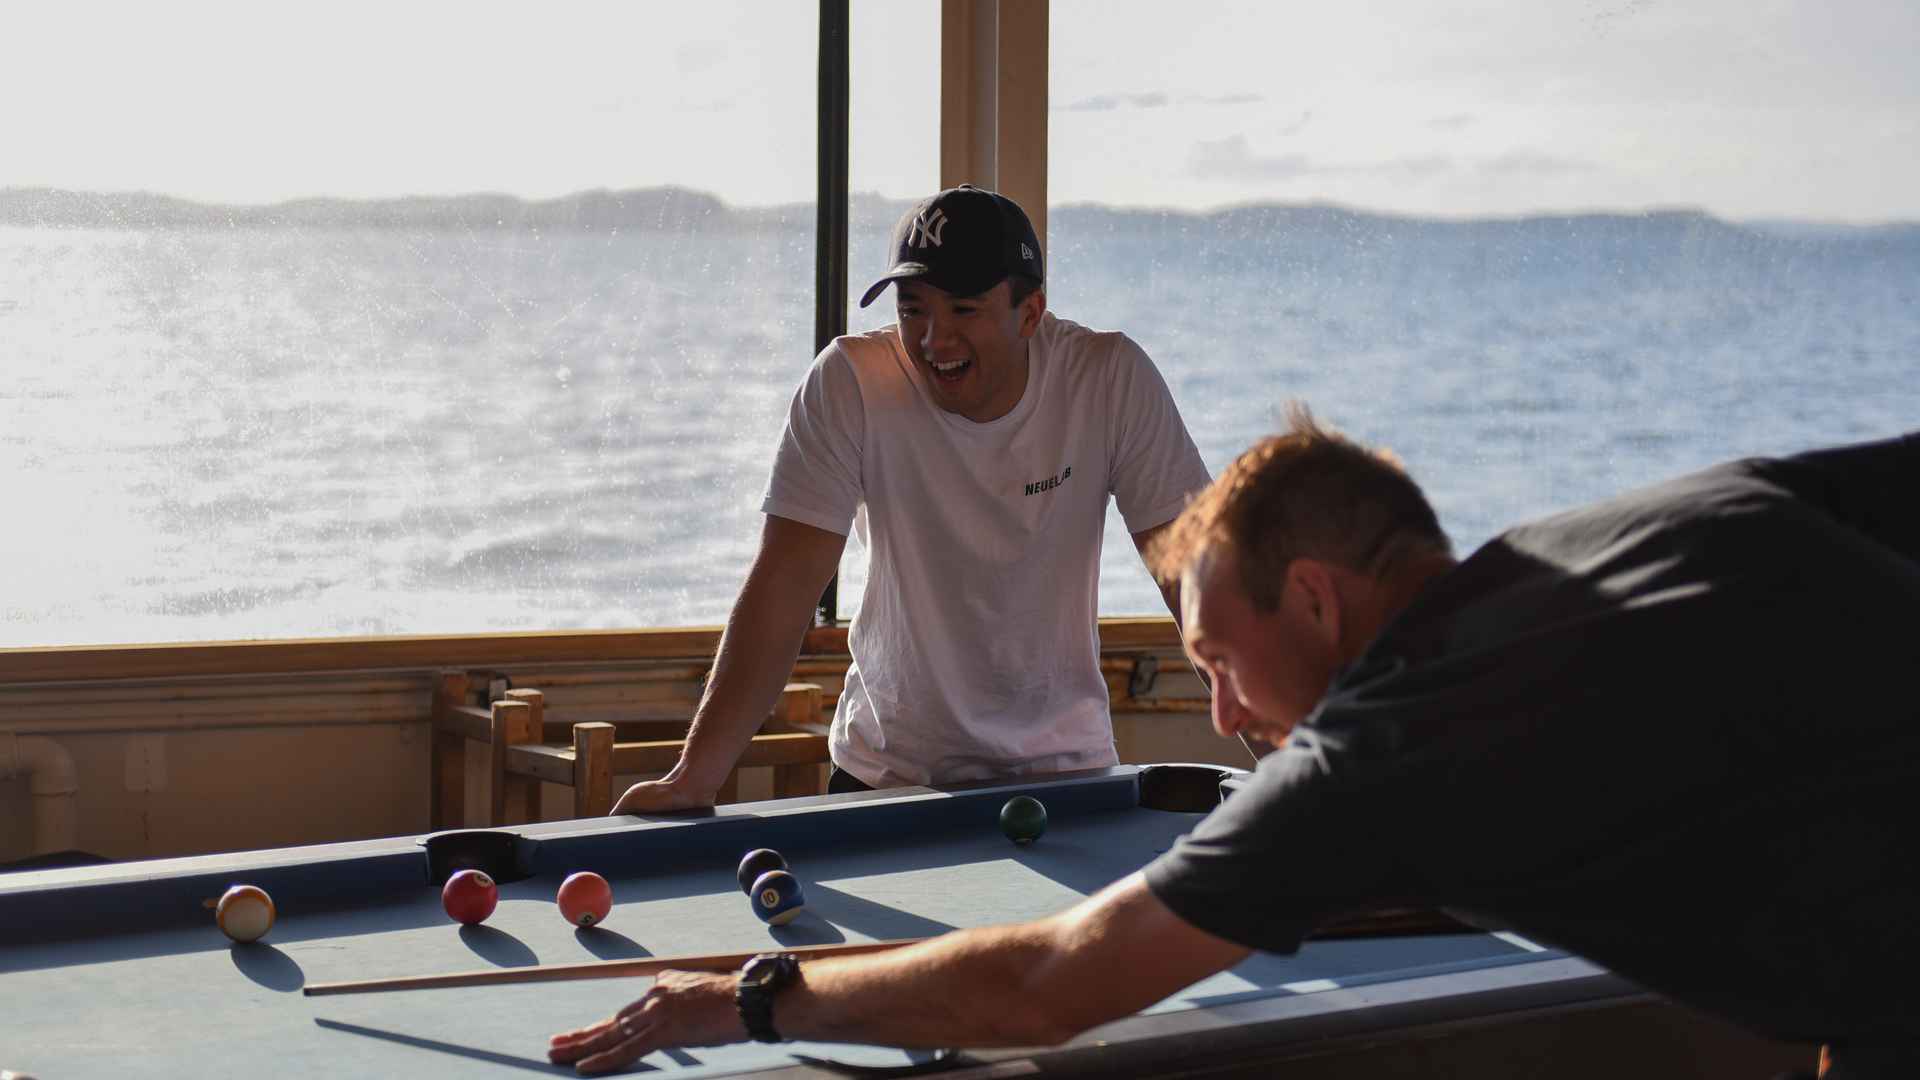 playing pool at The Rock Adventure Cruise